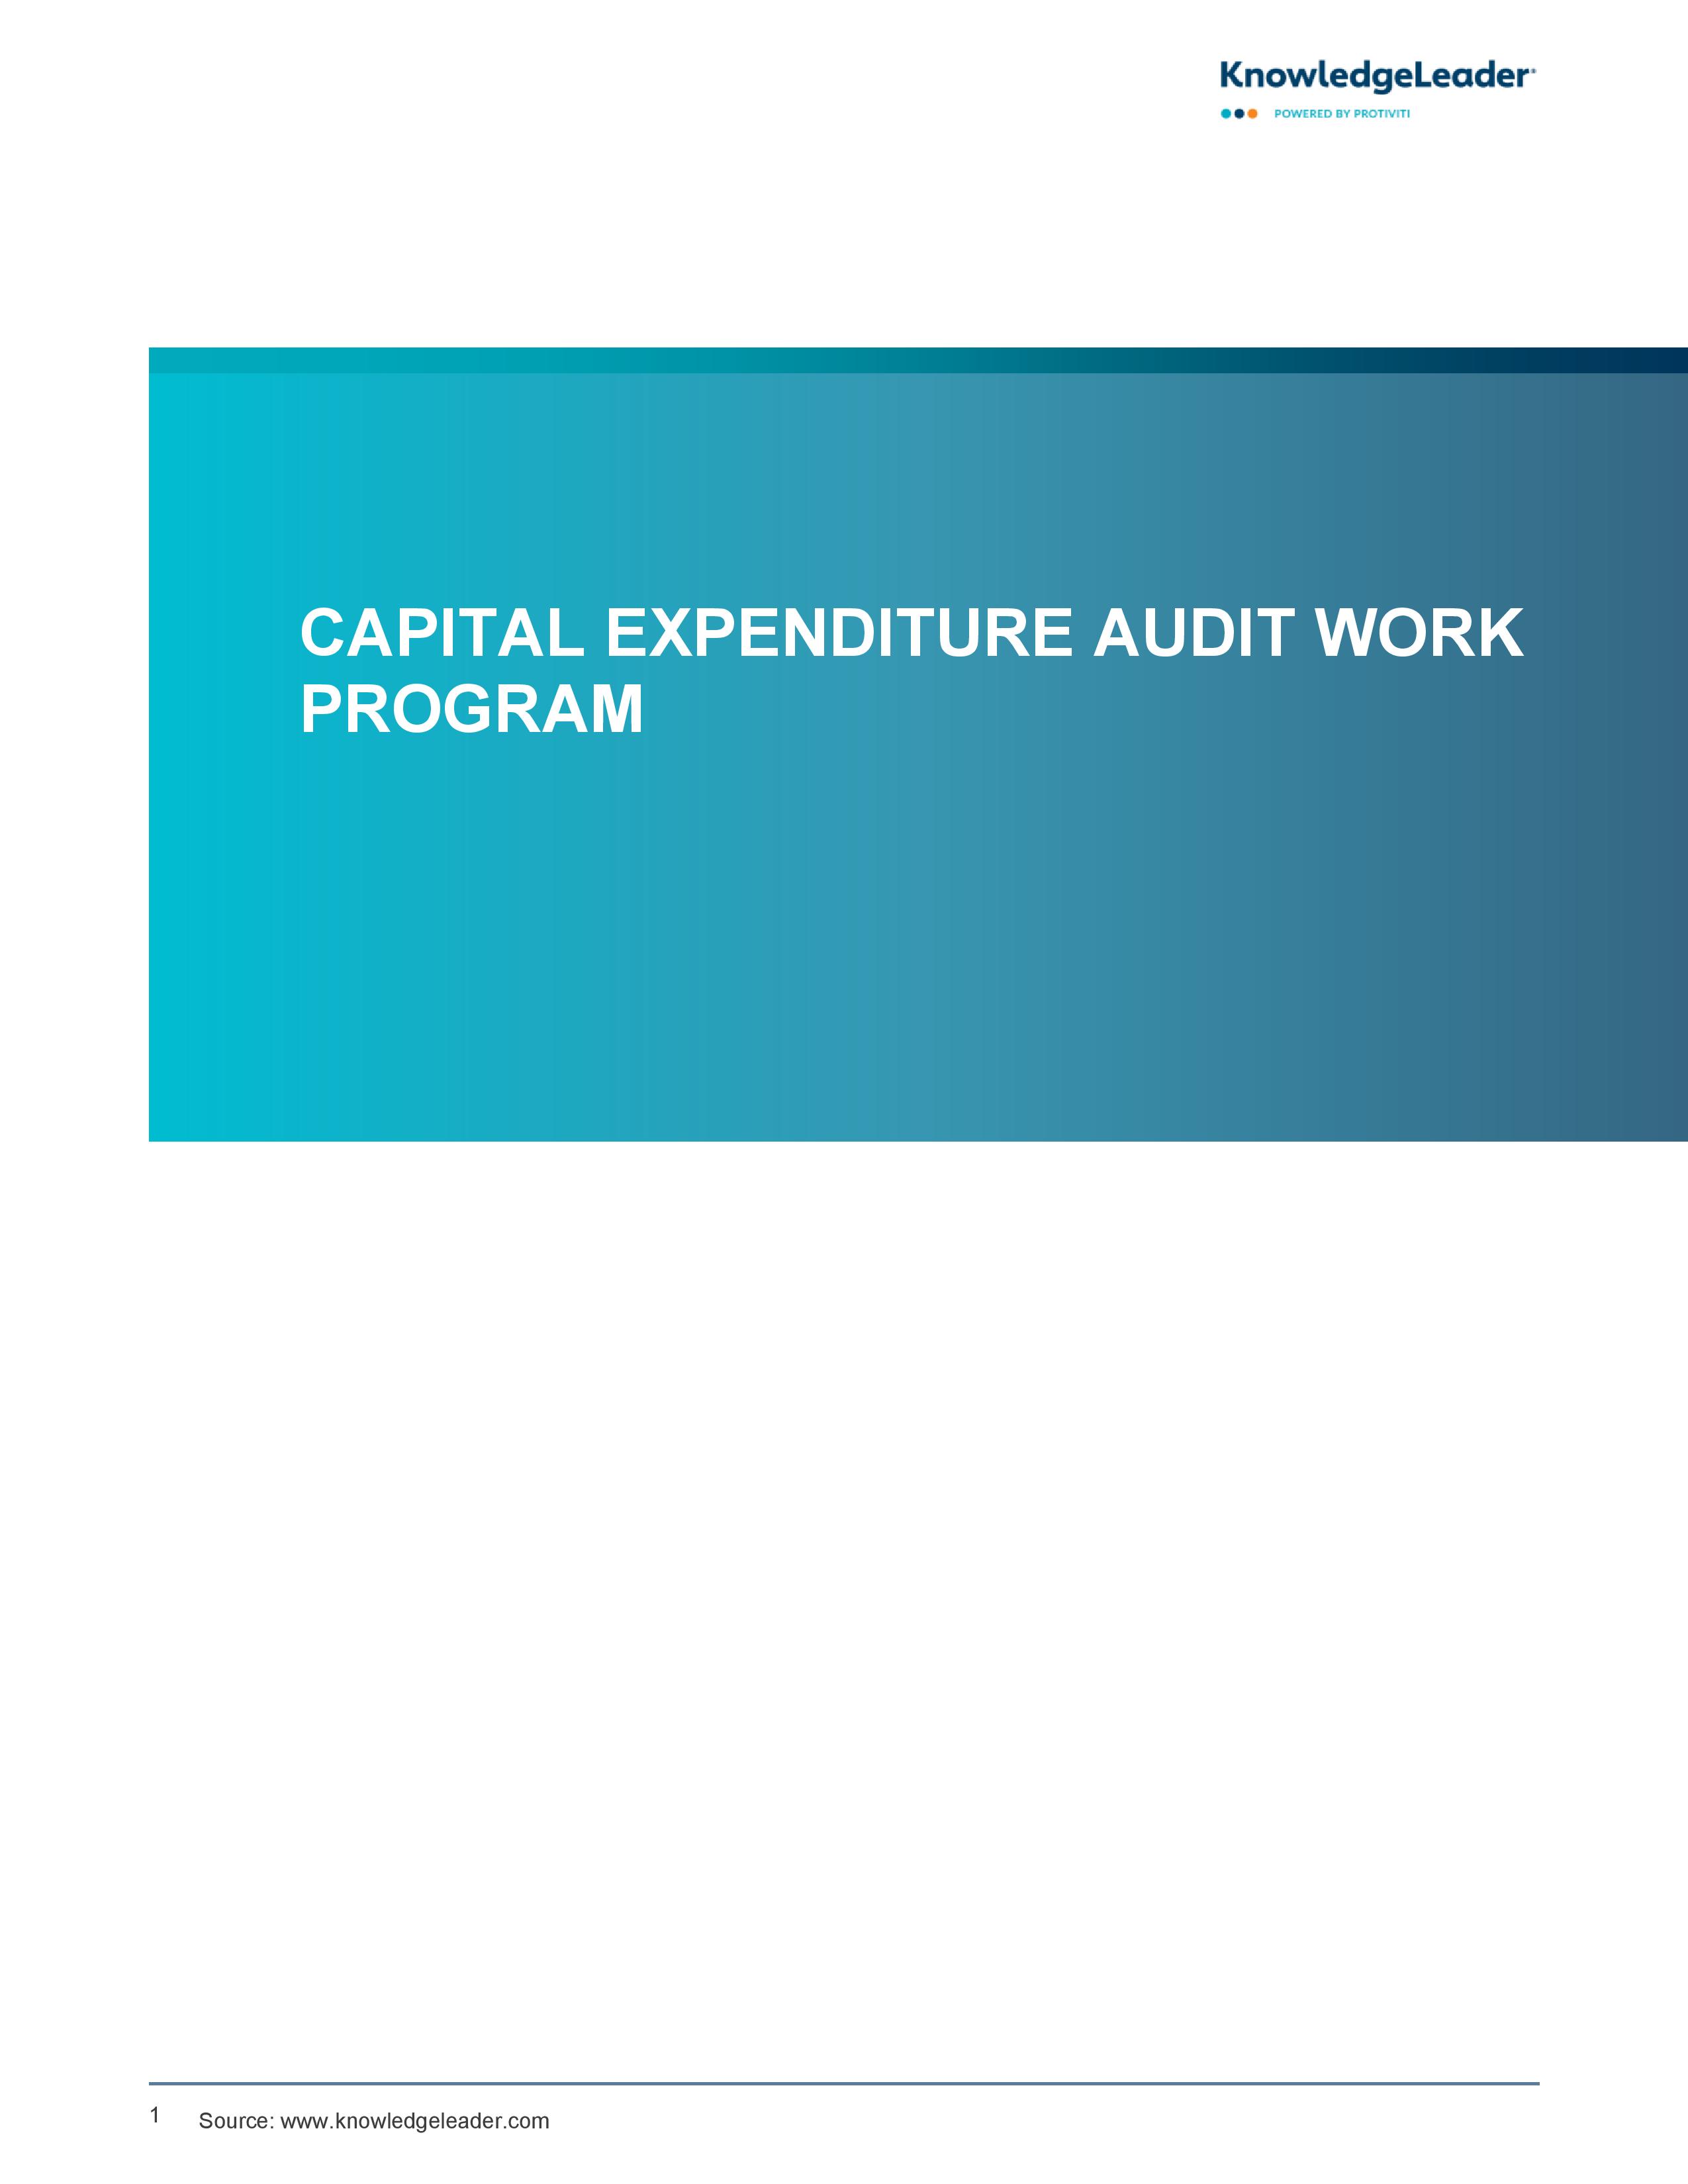 screenshot of the first page of Capital Expenditure Audit Work Program